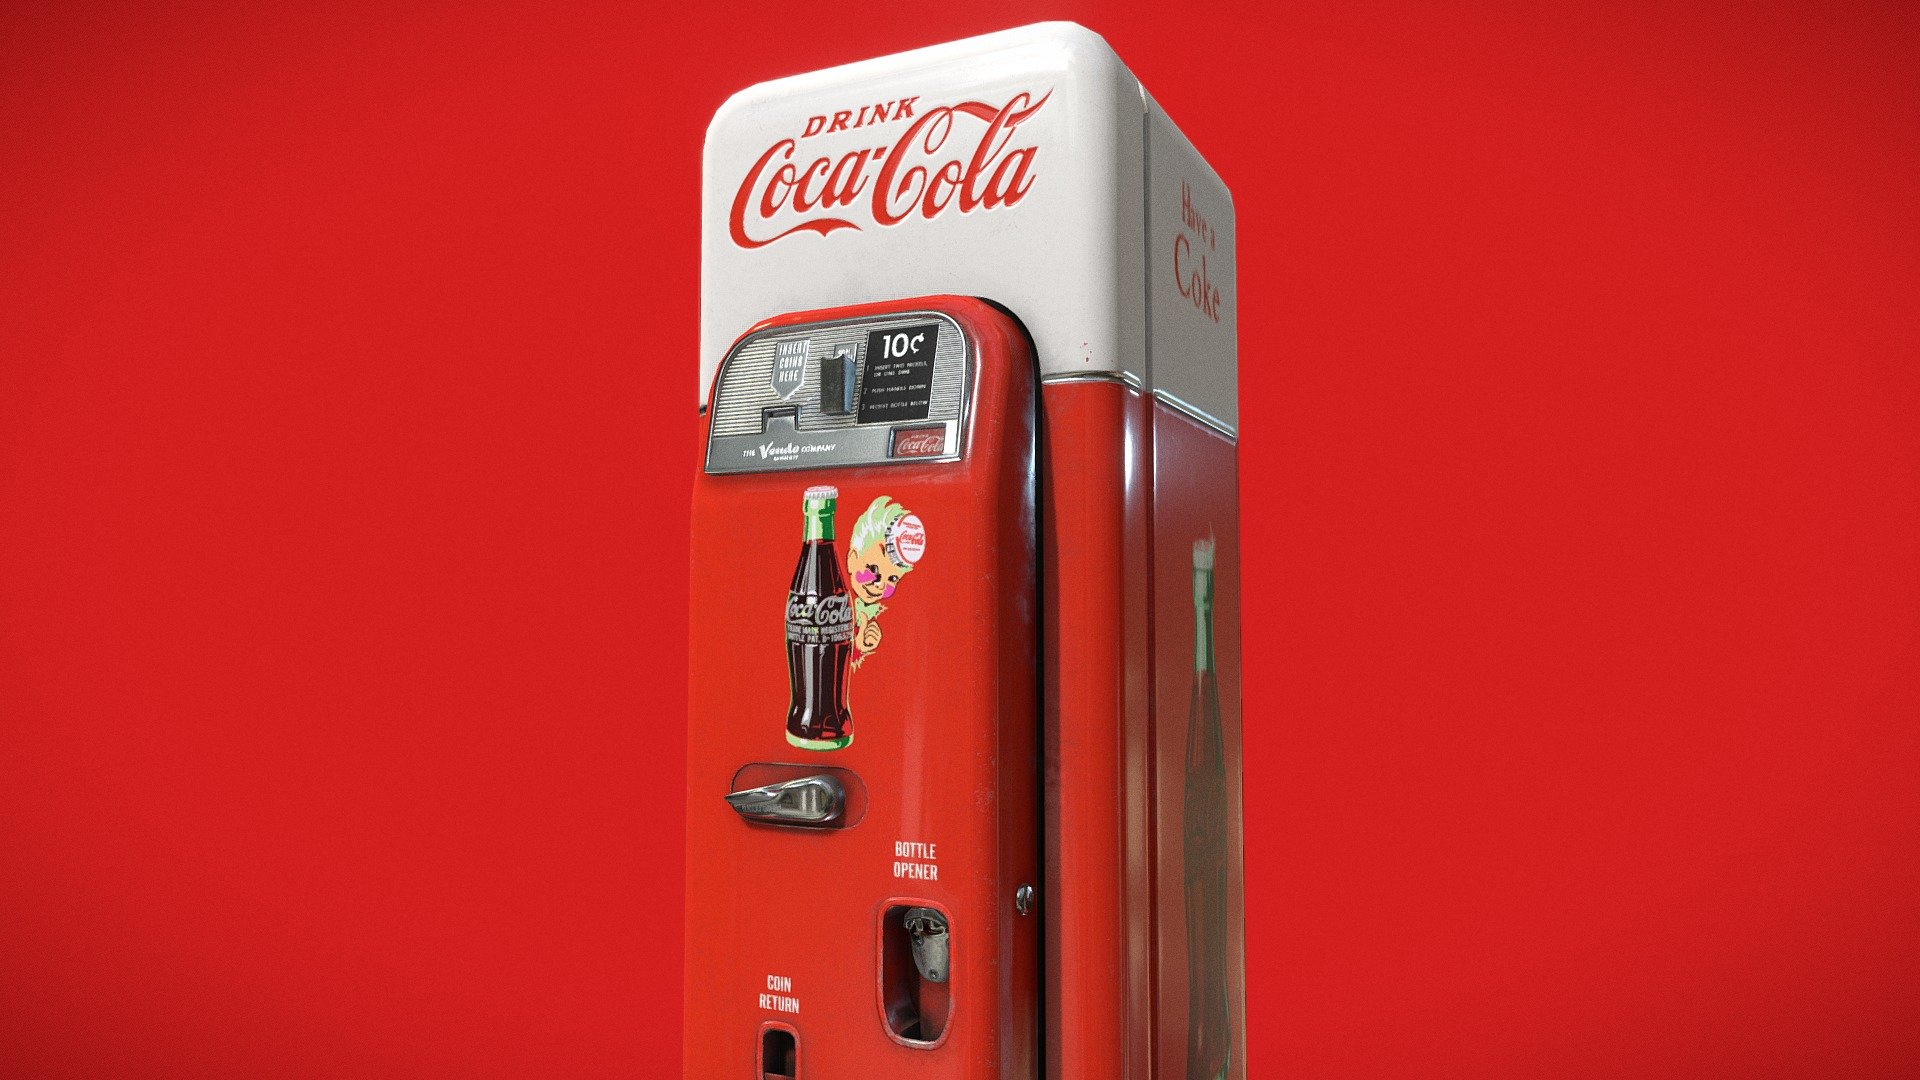 The Vendo Company produced these slim Coca-Cola vending machines from 1956-1959 3d model